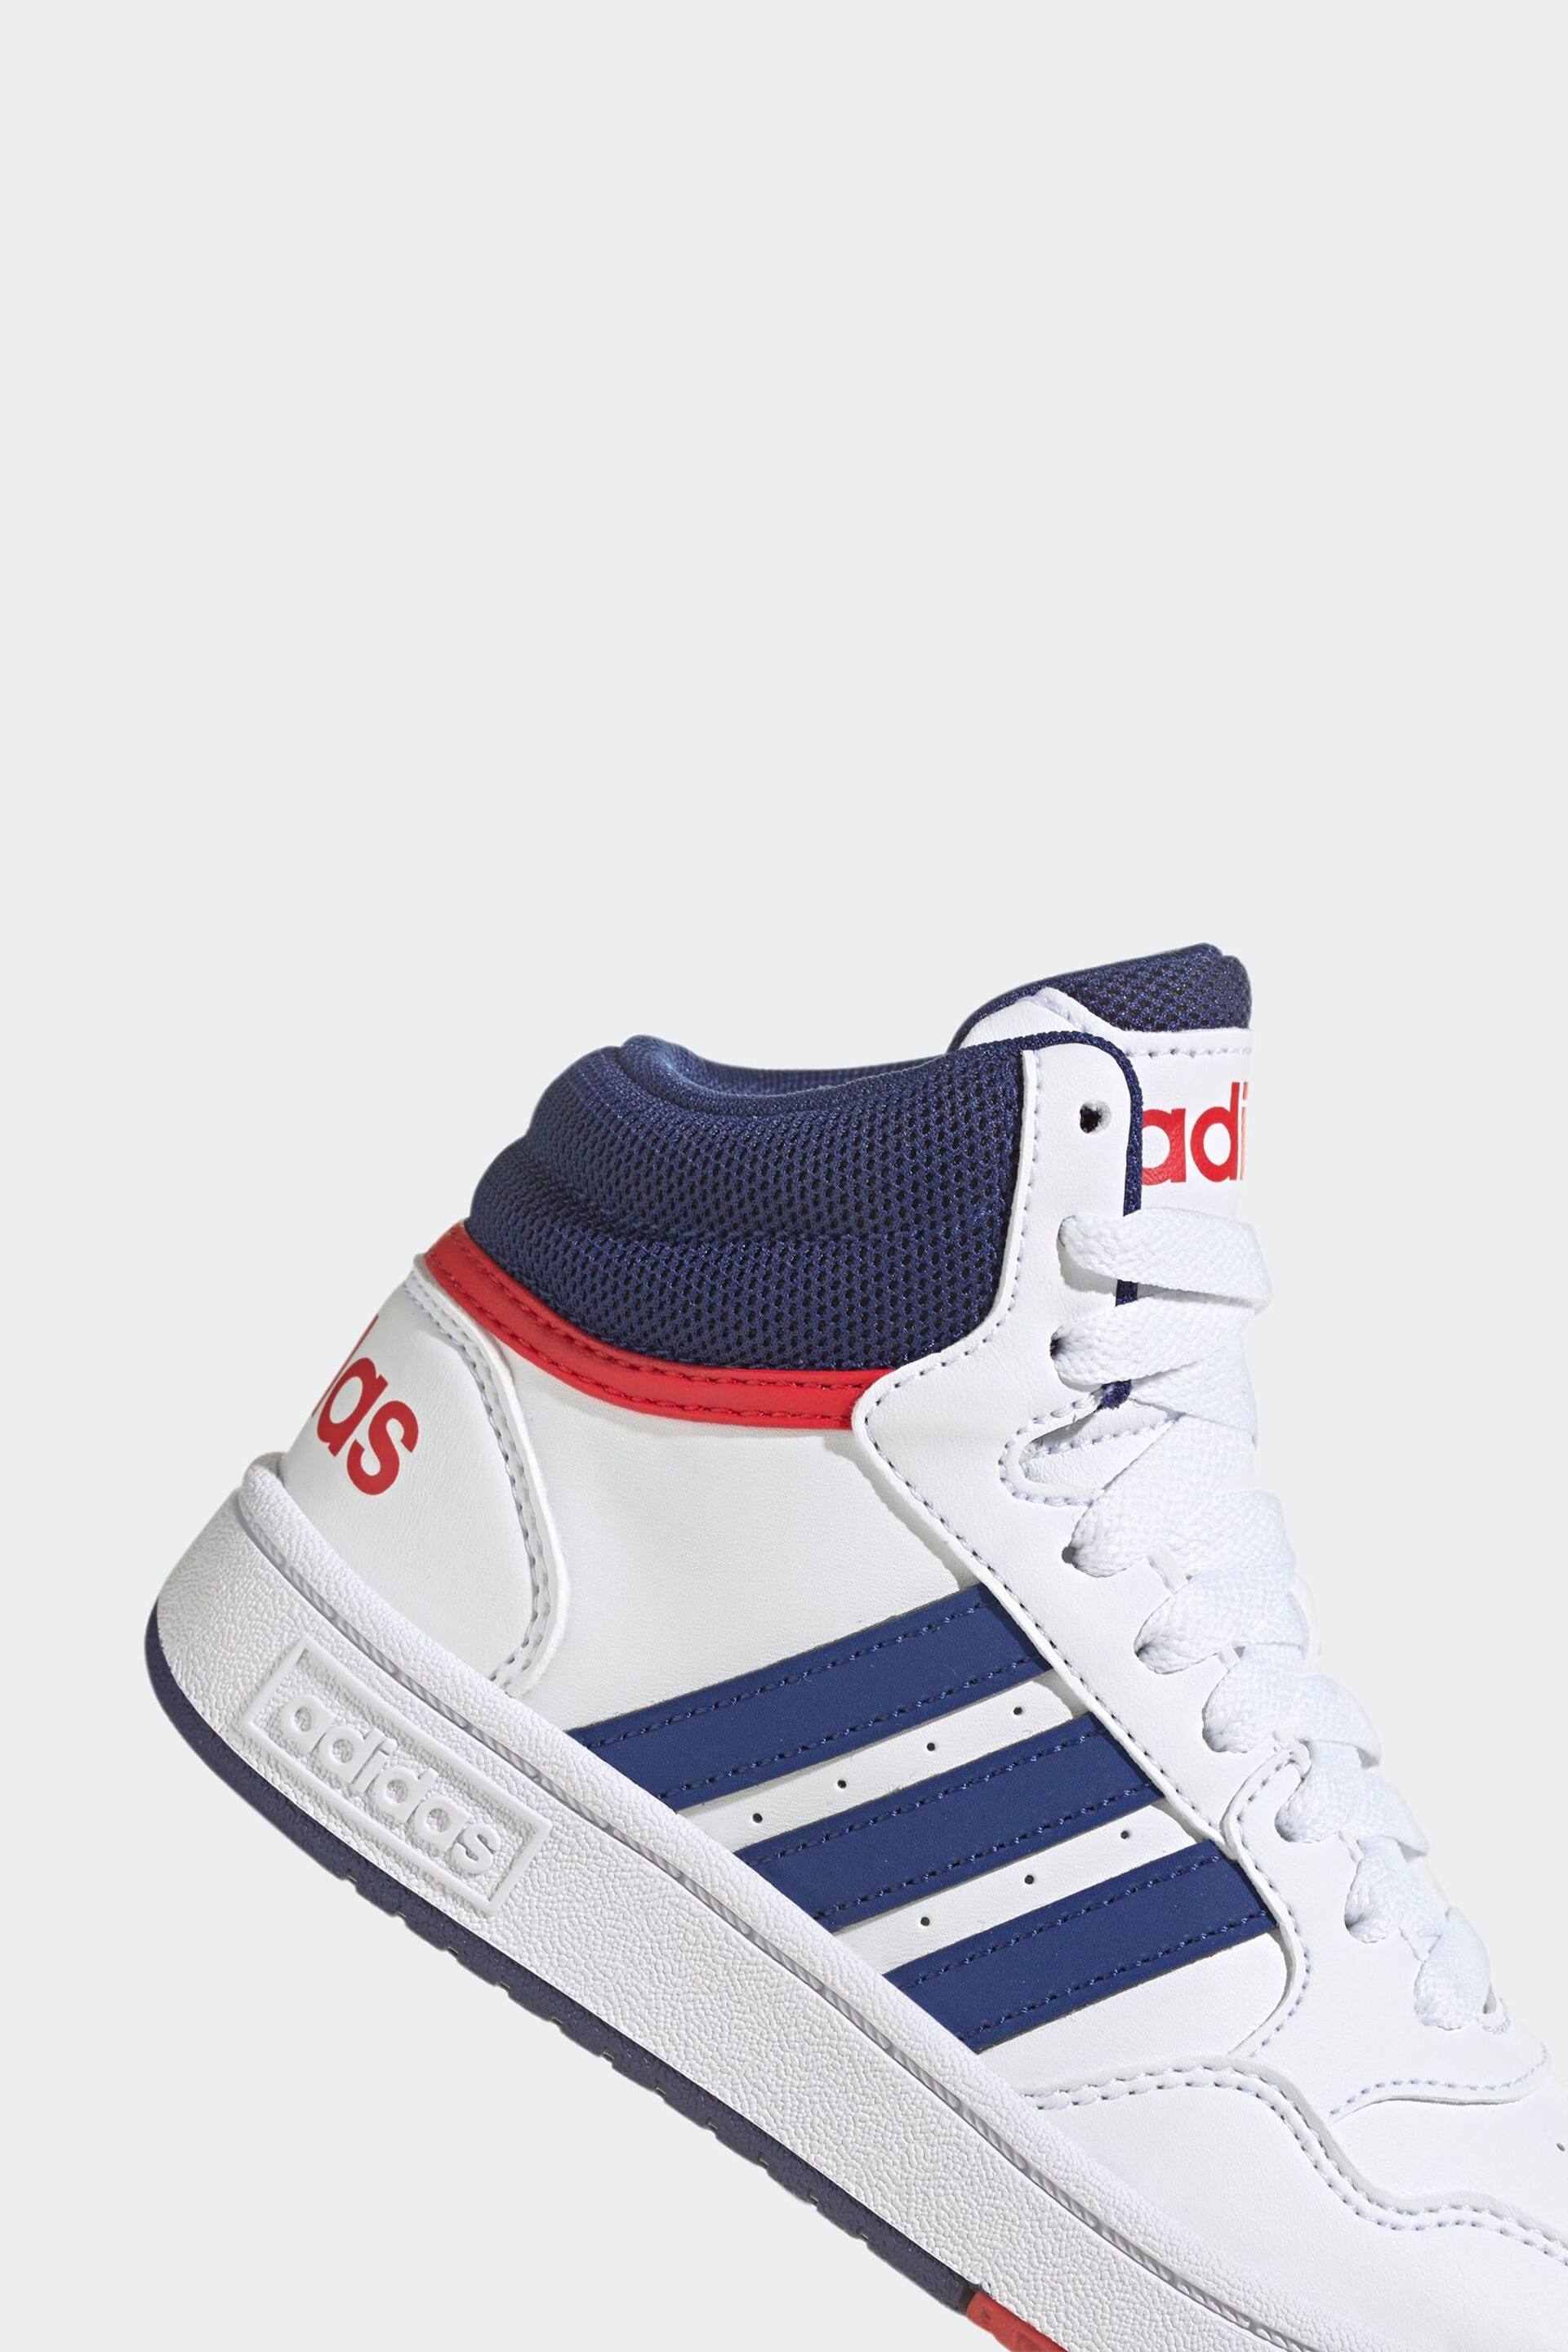 adidas White/Blue Hoops Mid Shoes - Image 8 of 9